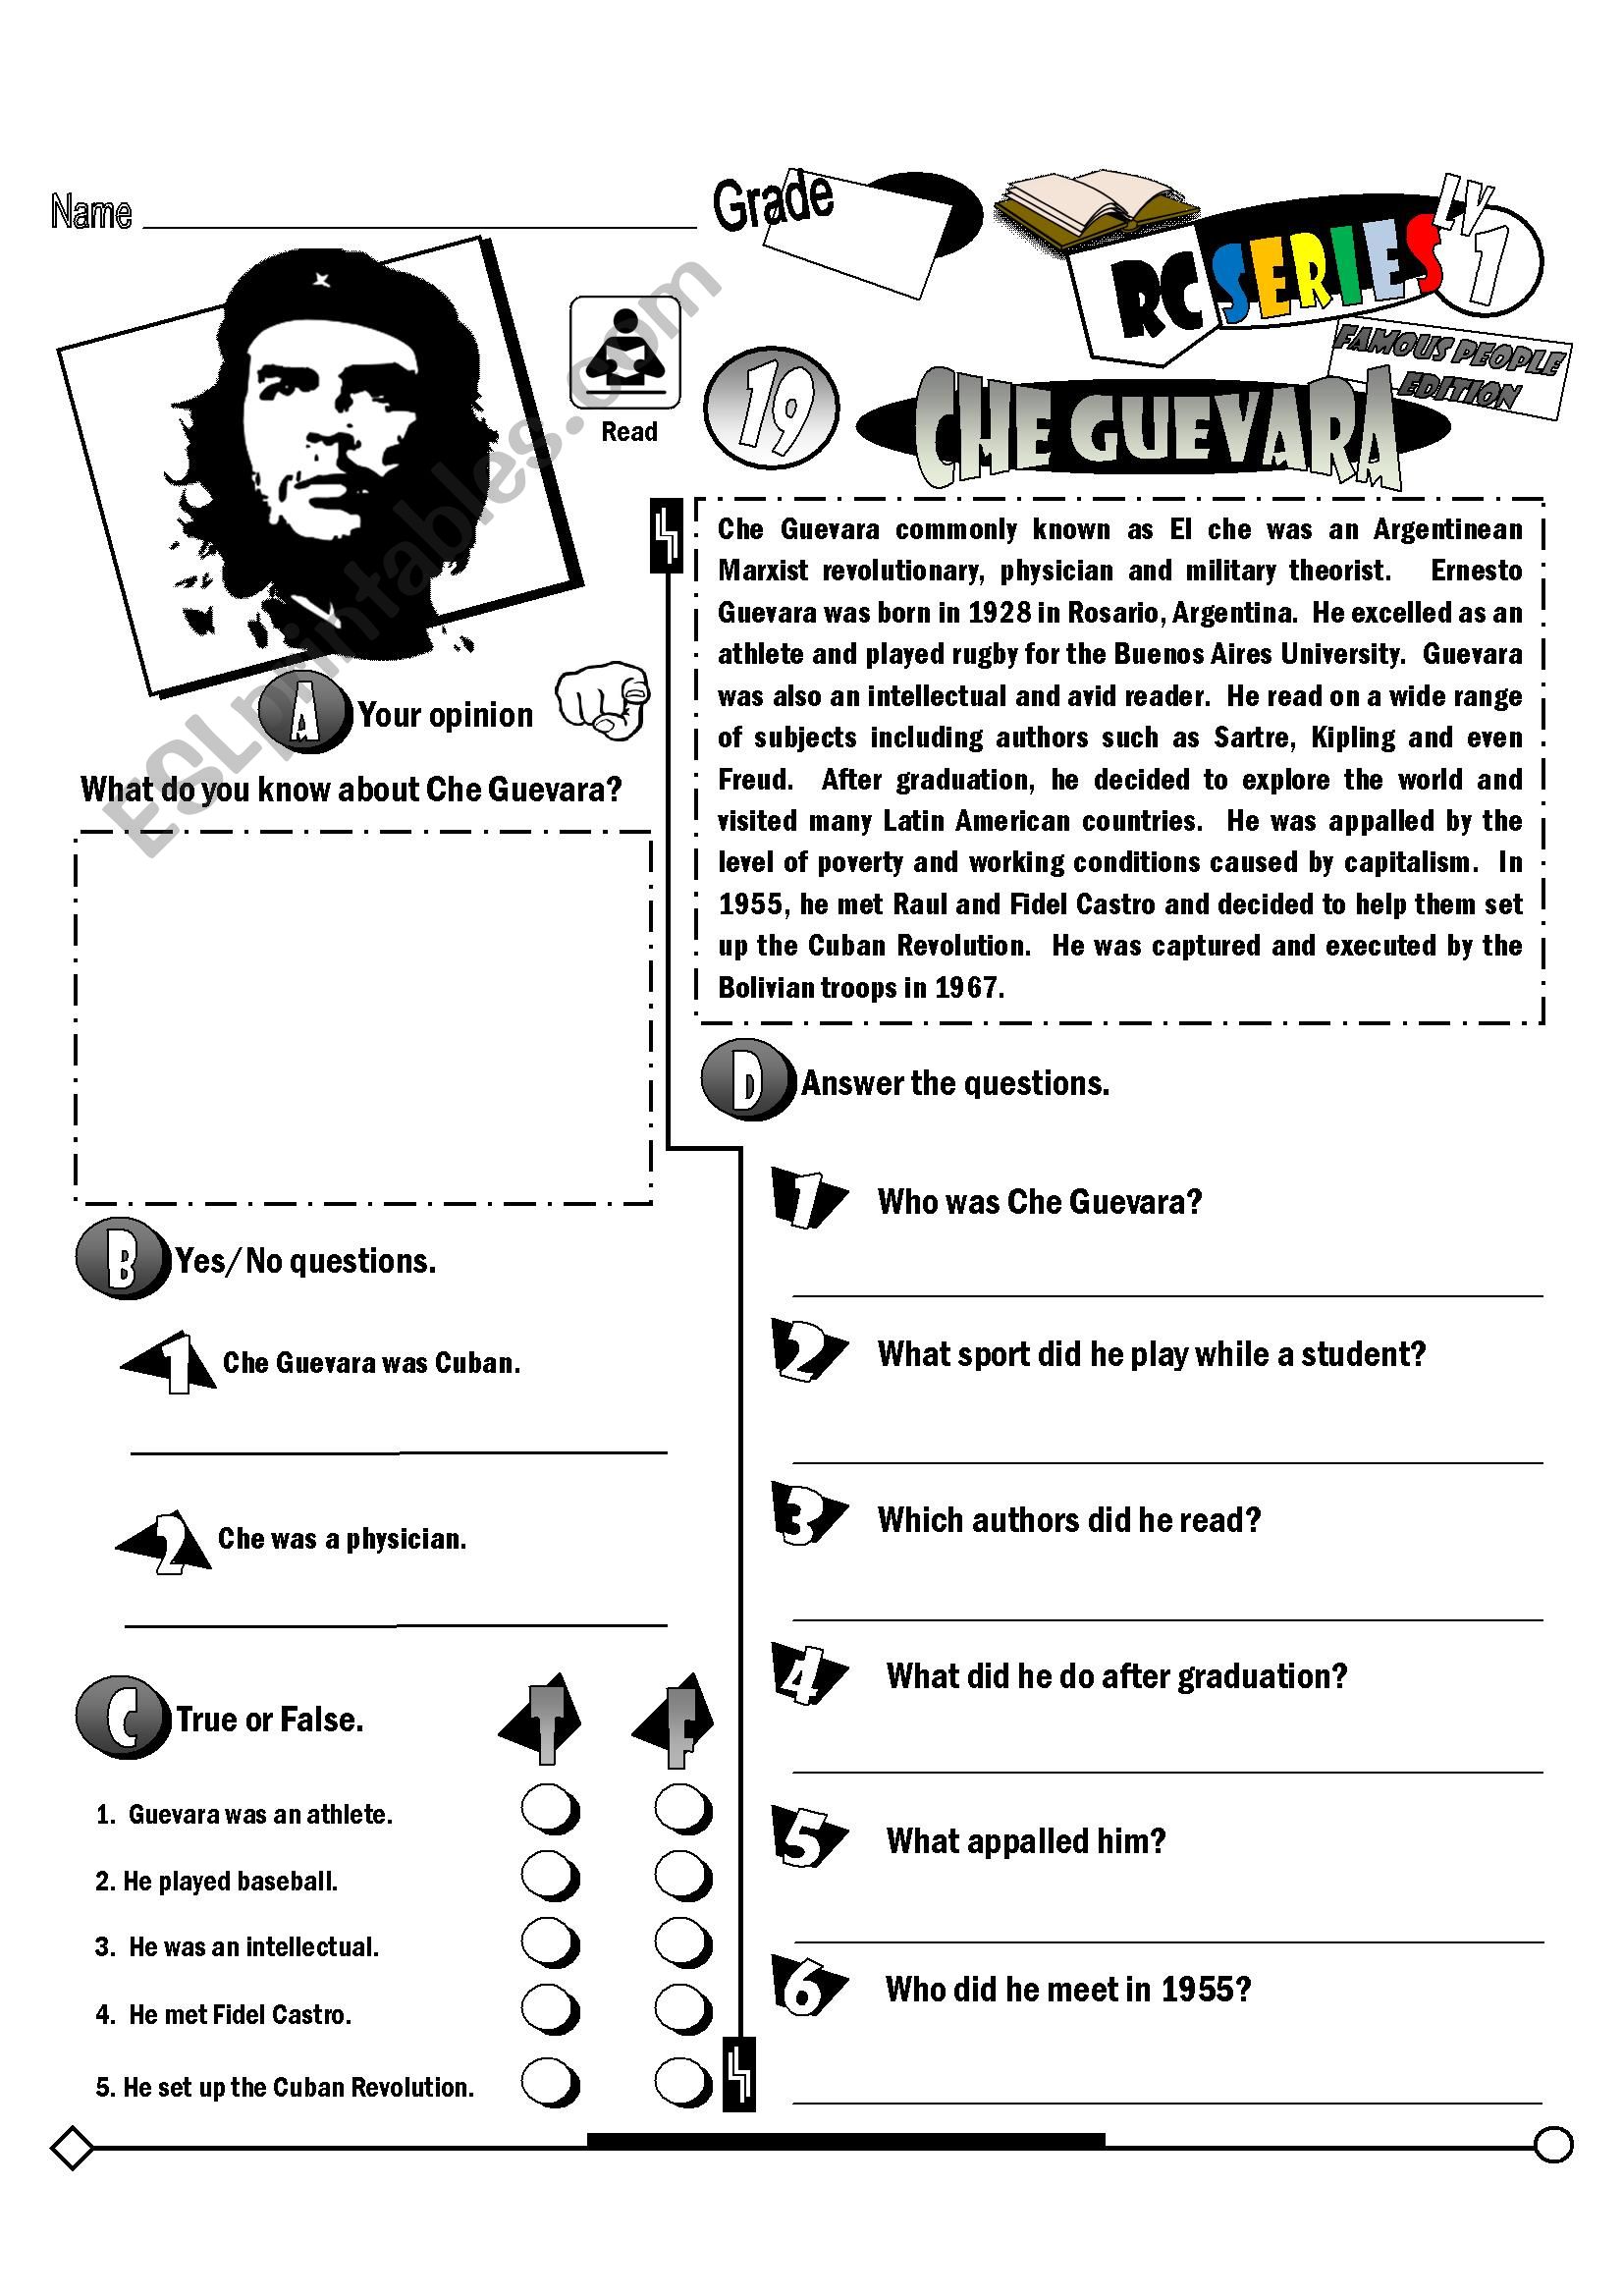 RC Series Famous People Edition_19 Che Guevara (Fully Editable)